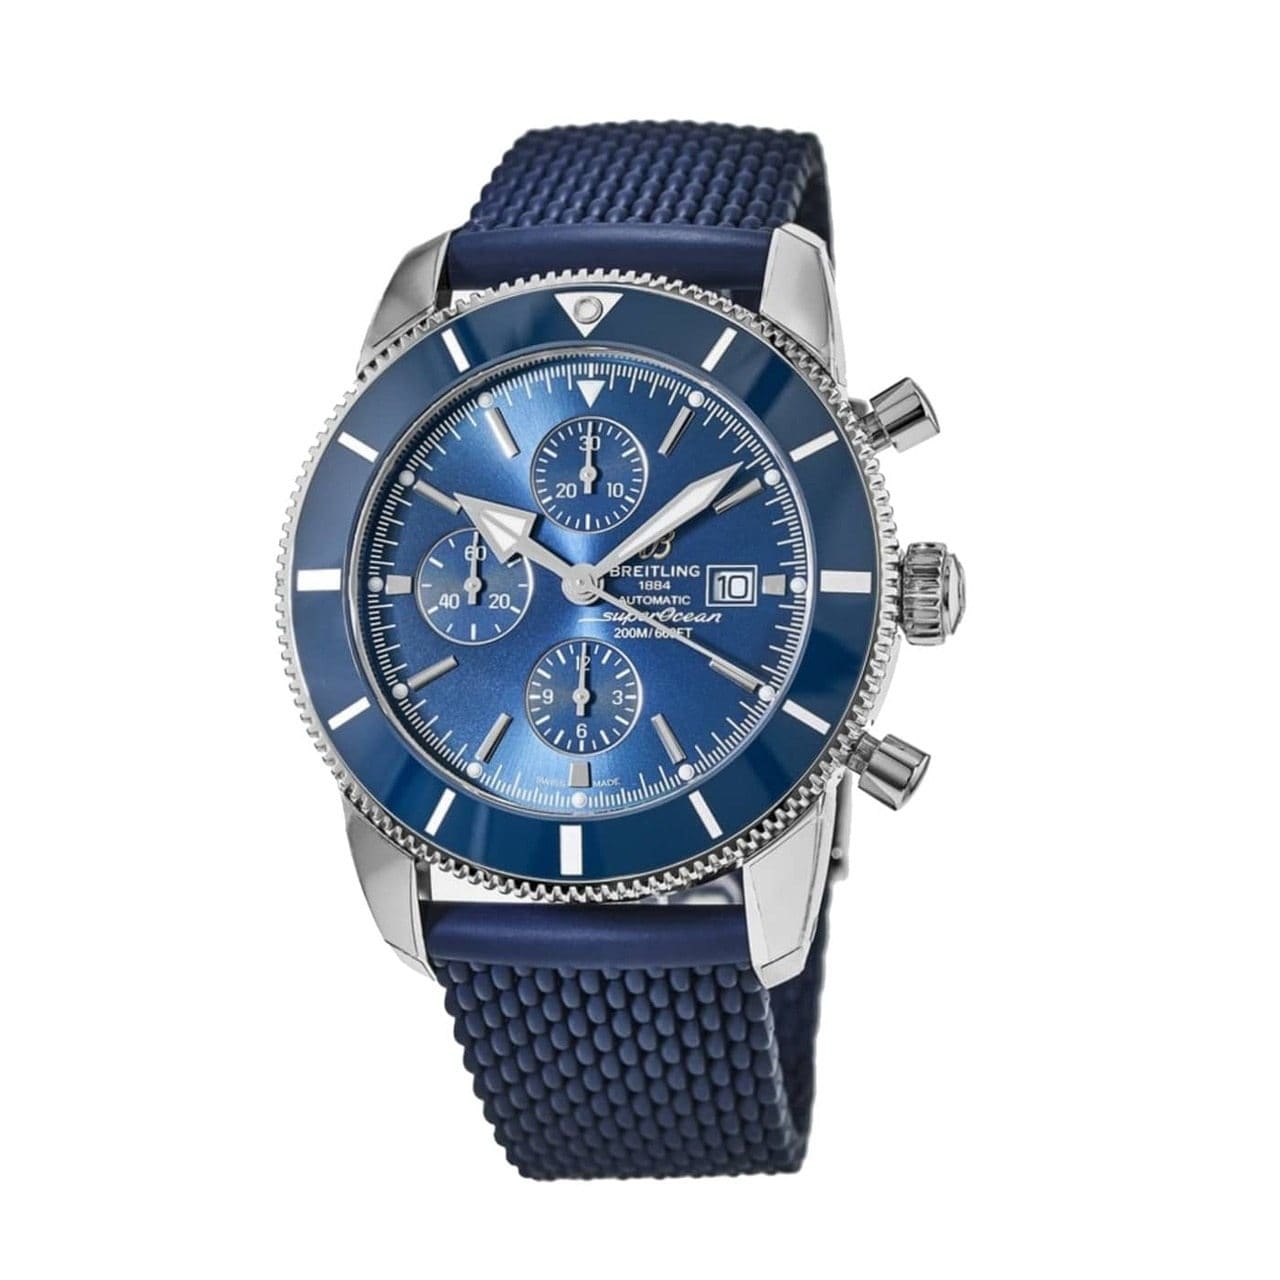 Breitling A1331216 Superocean Heritage II Blue Dial Aero Classic Rubber Chronograph Watch
